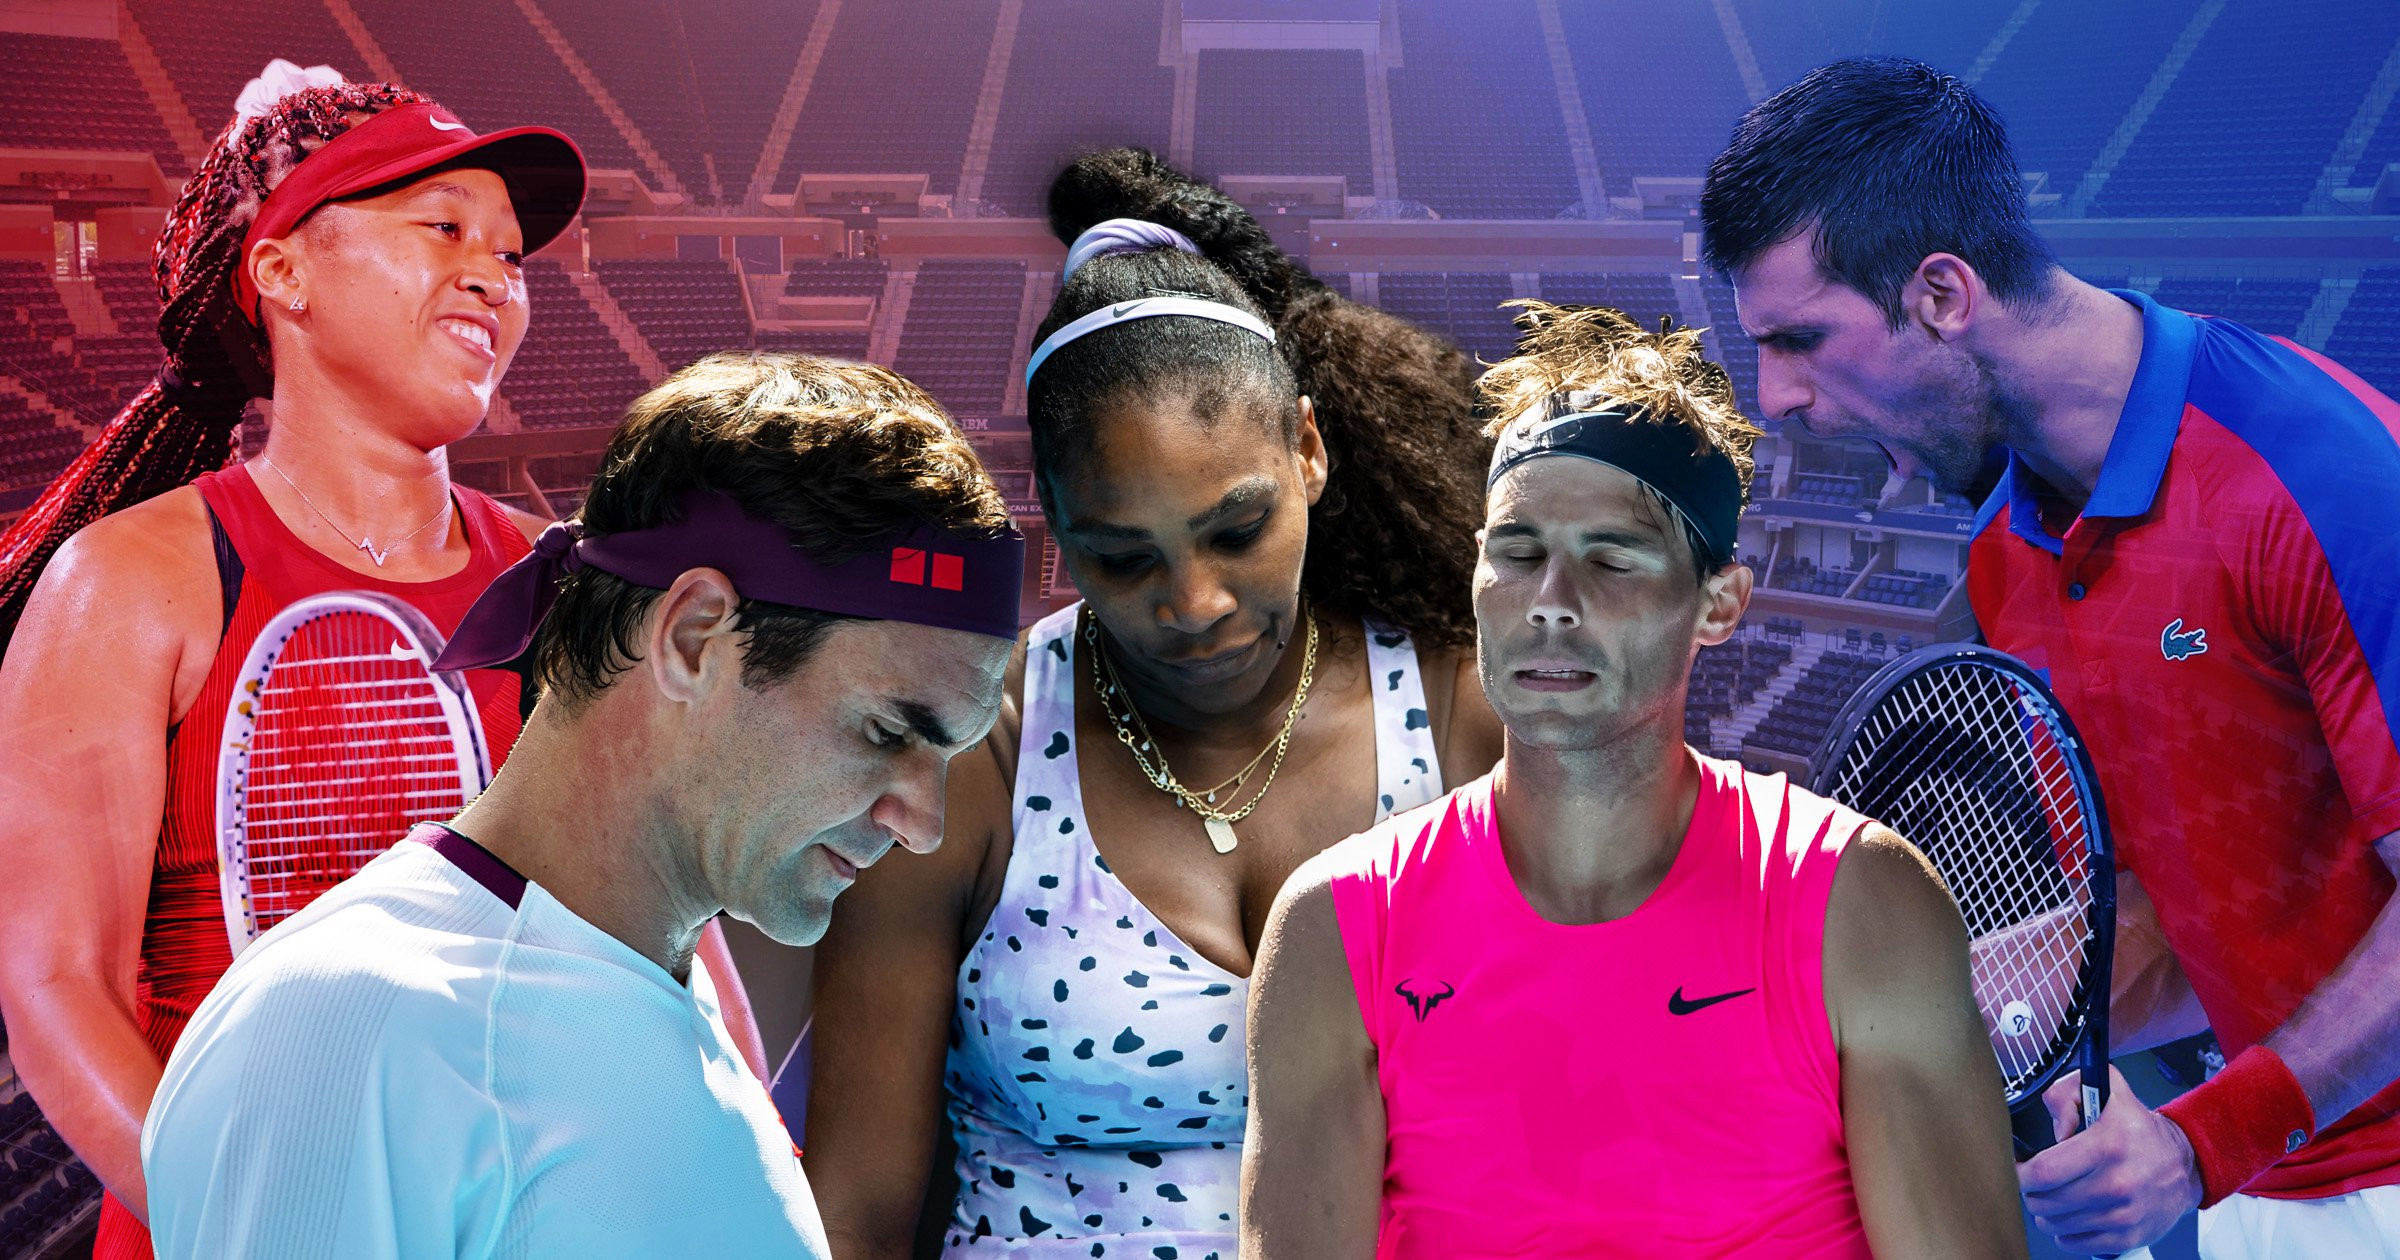 Roger Federer, Rafael Nadal and Serena Williams US Open absence marks end of an era but nothing really changes